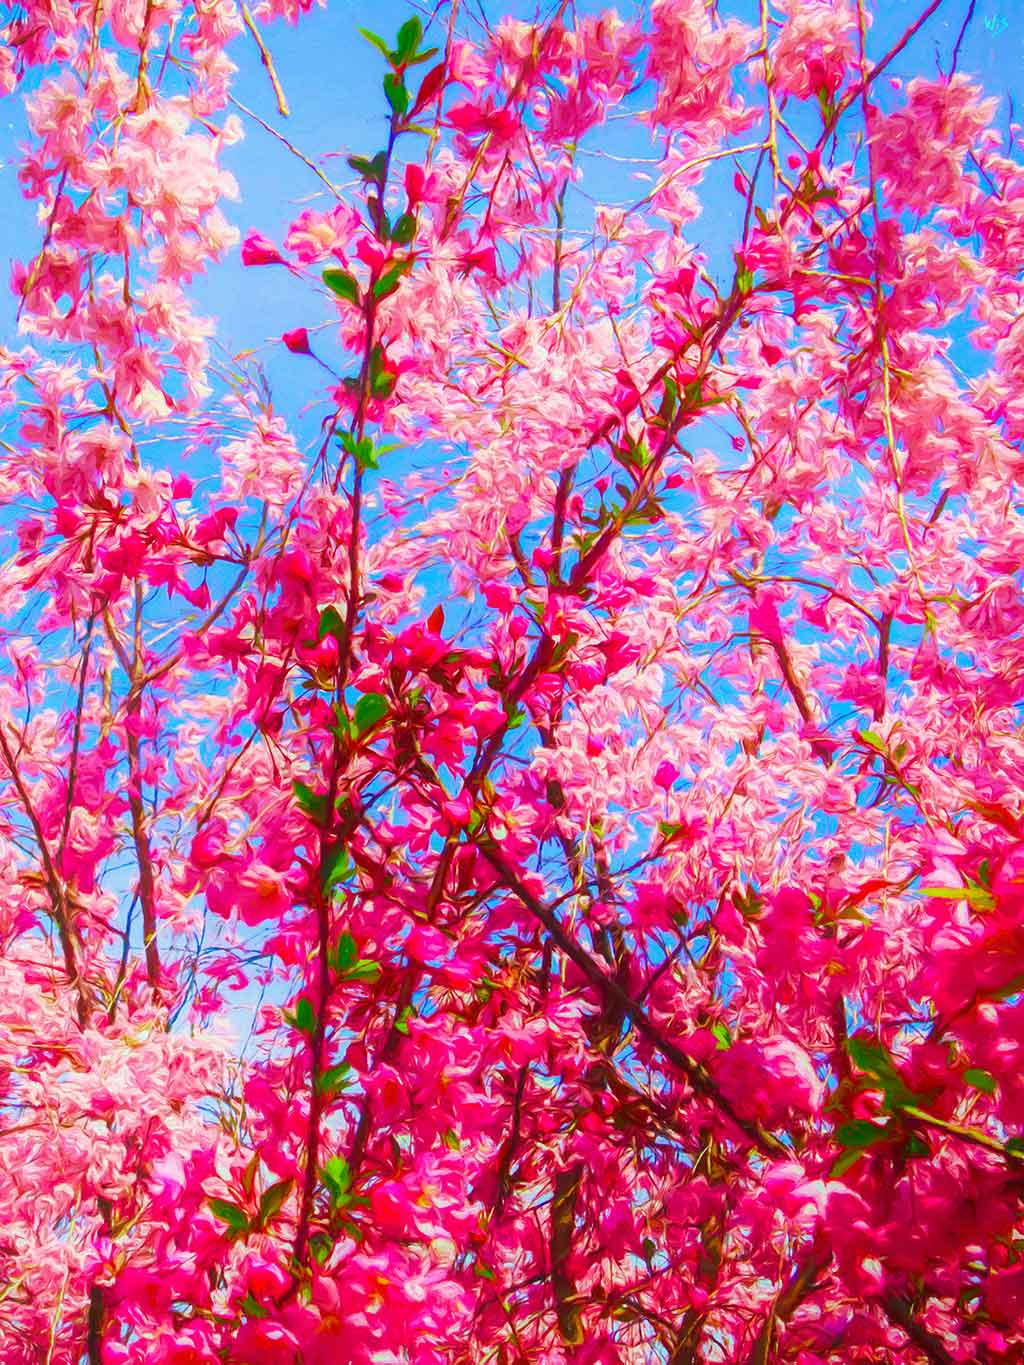 Cherry branches full of flowers shining pink against blue sky in the back; by Wiesław Sadurski